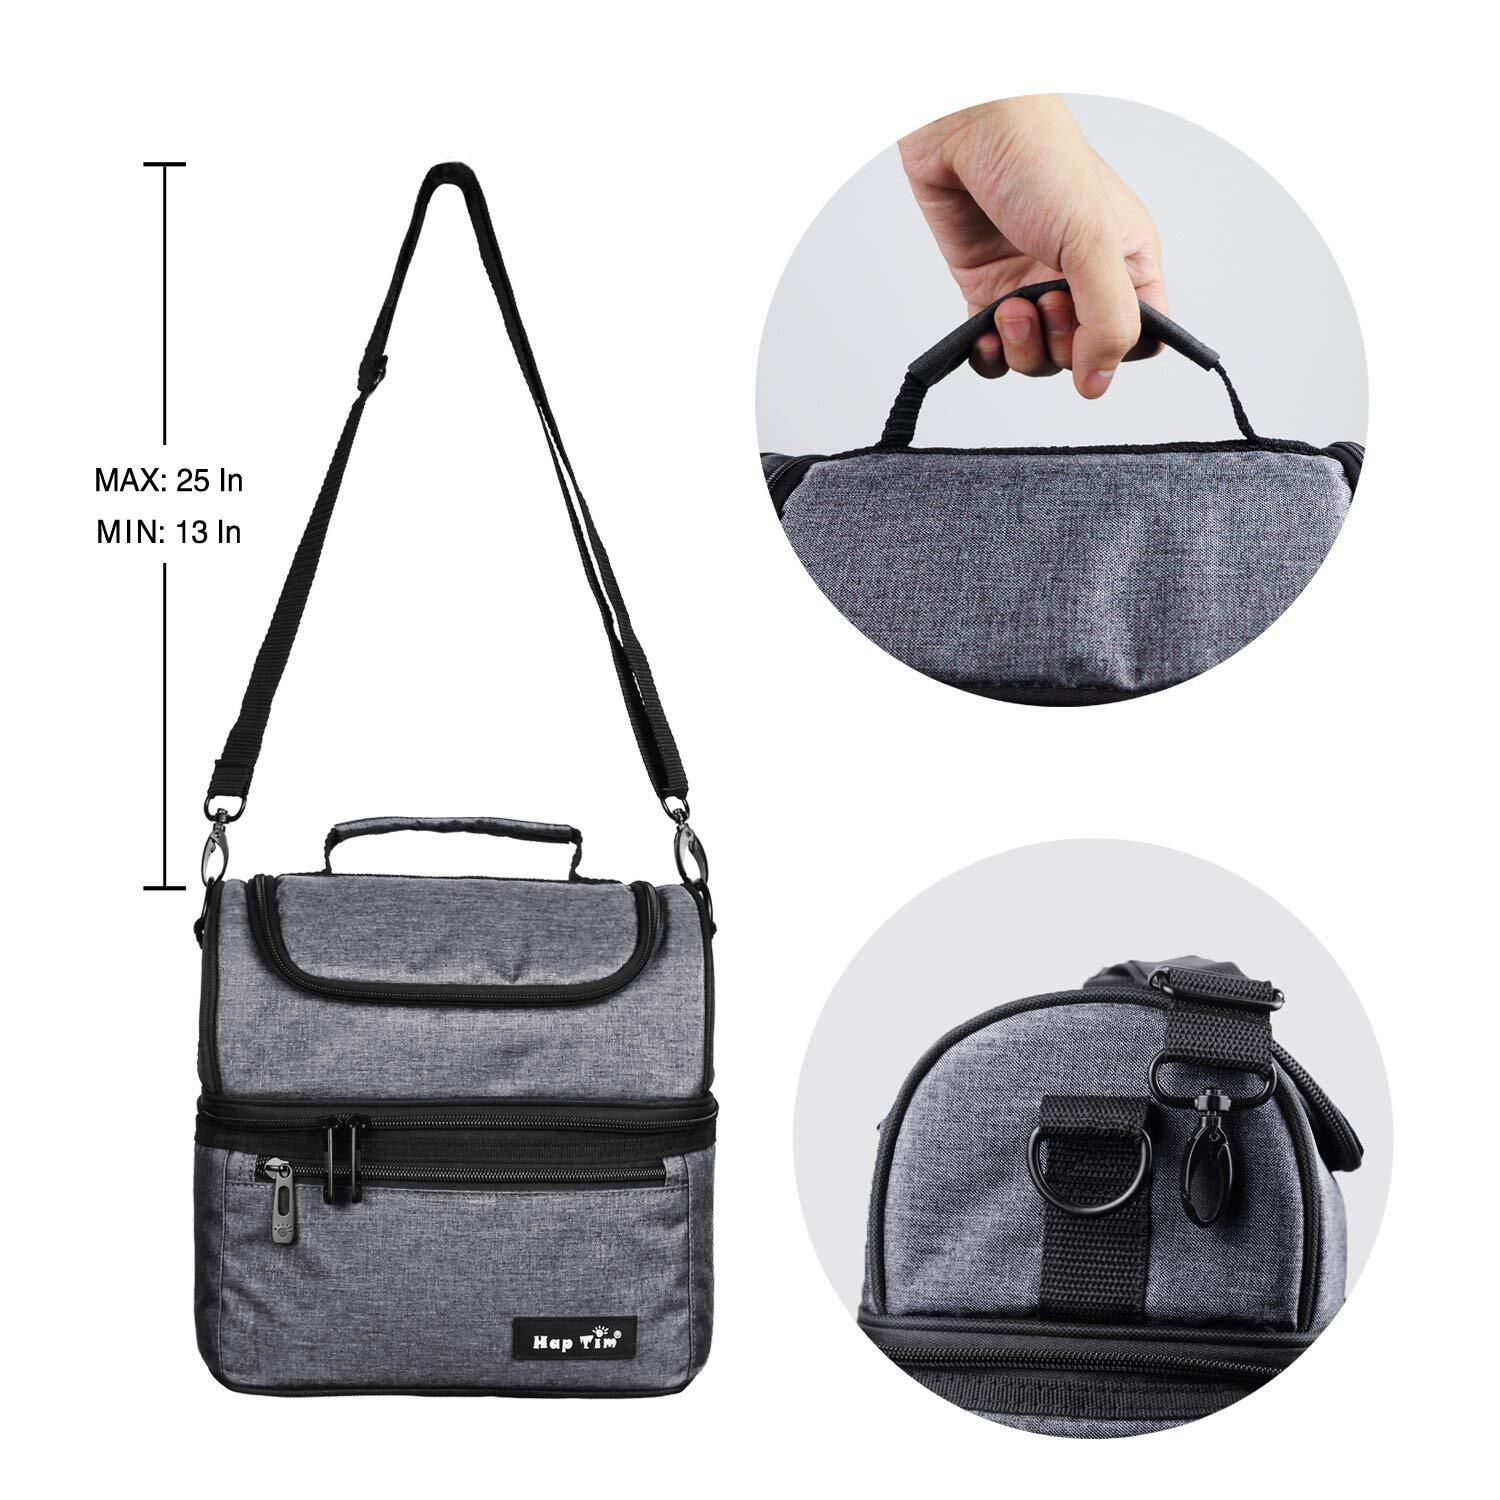 https://images.51microshop.com/1658/product/20180927/Hap_Tim_Lunch_Box_Insulated_Lunch_Bag_Large_Cooler_Tote_Bag_16040_G__1538017309105_4.jpg